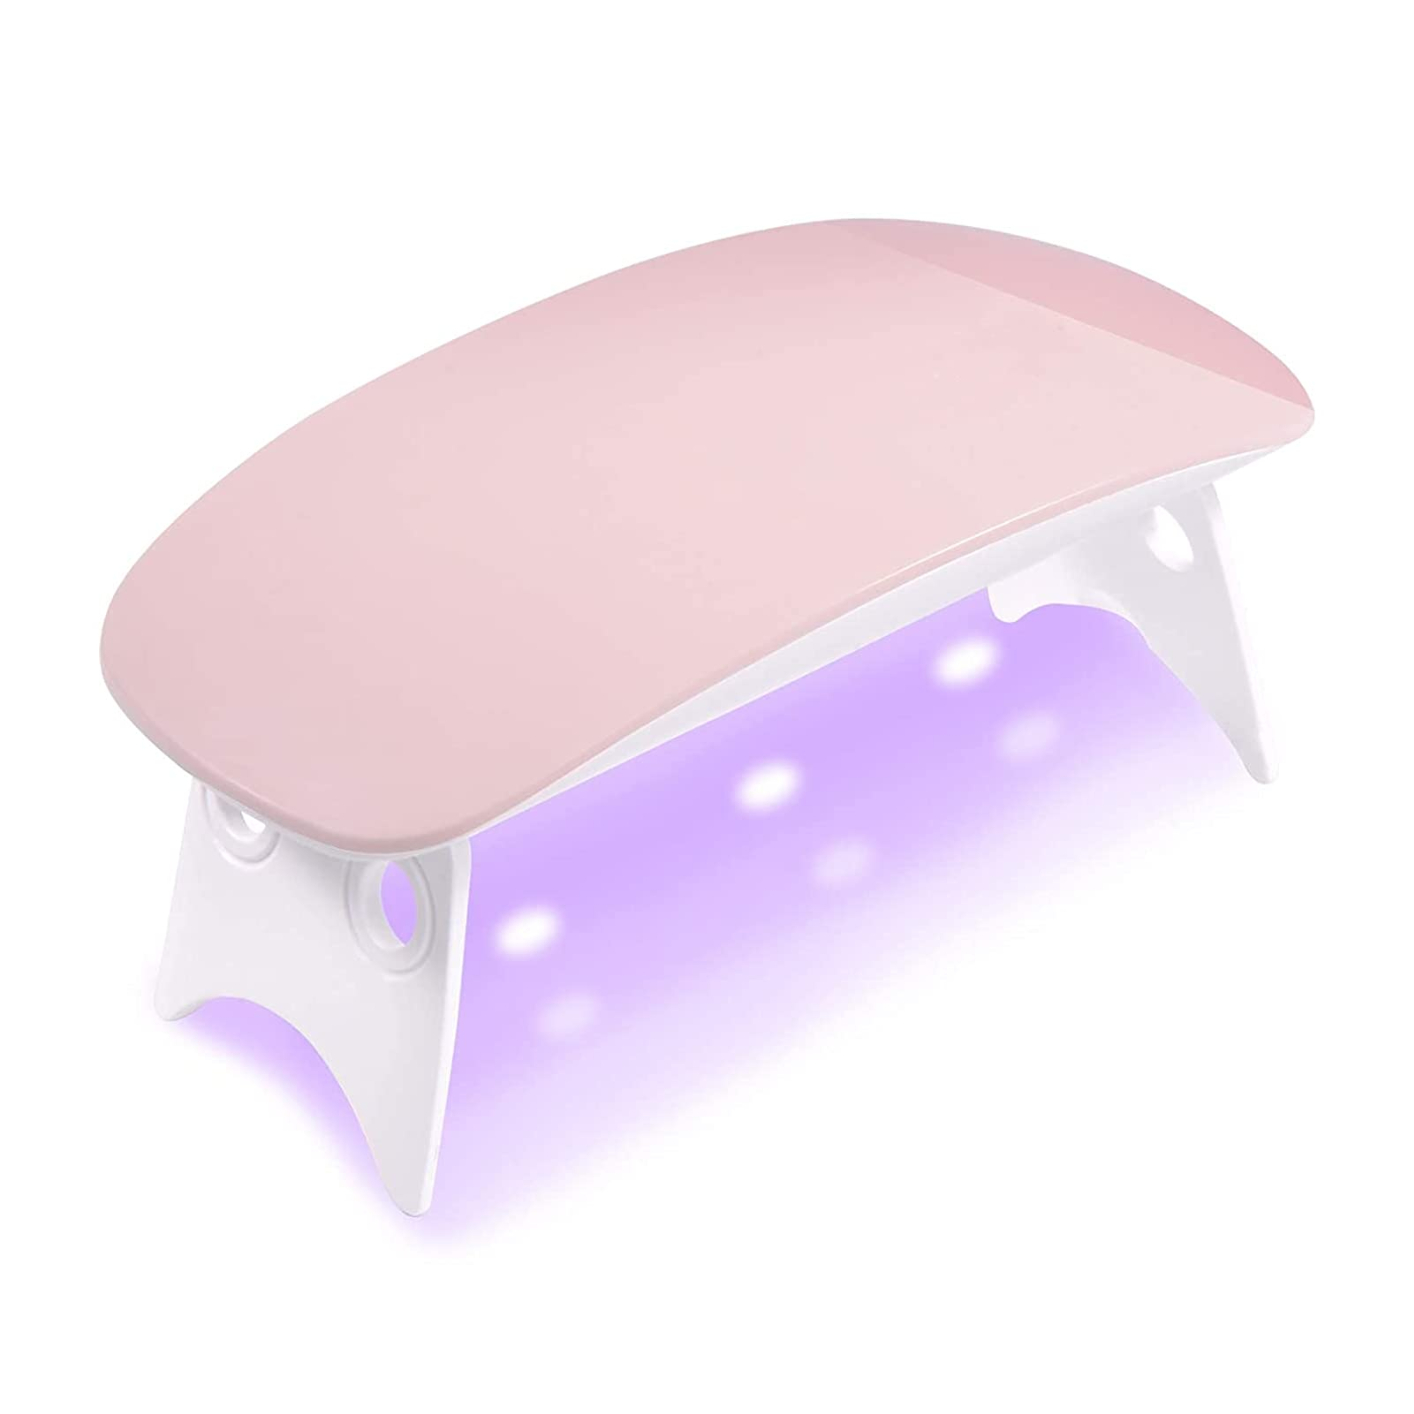 Mini UV LED Nail Lamp, Portable Gel Light Mouse Shape Pocket Size Nail Dryer with USB Cable for All Gel Polish